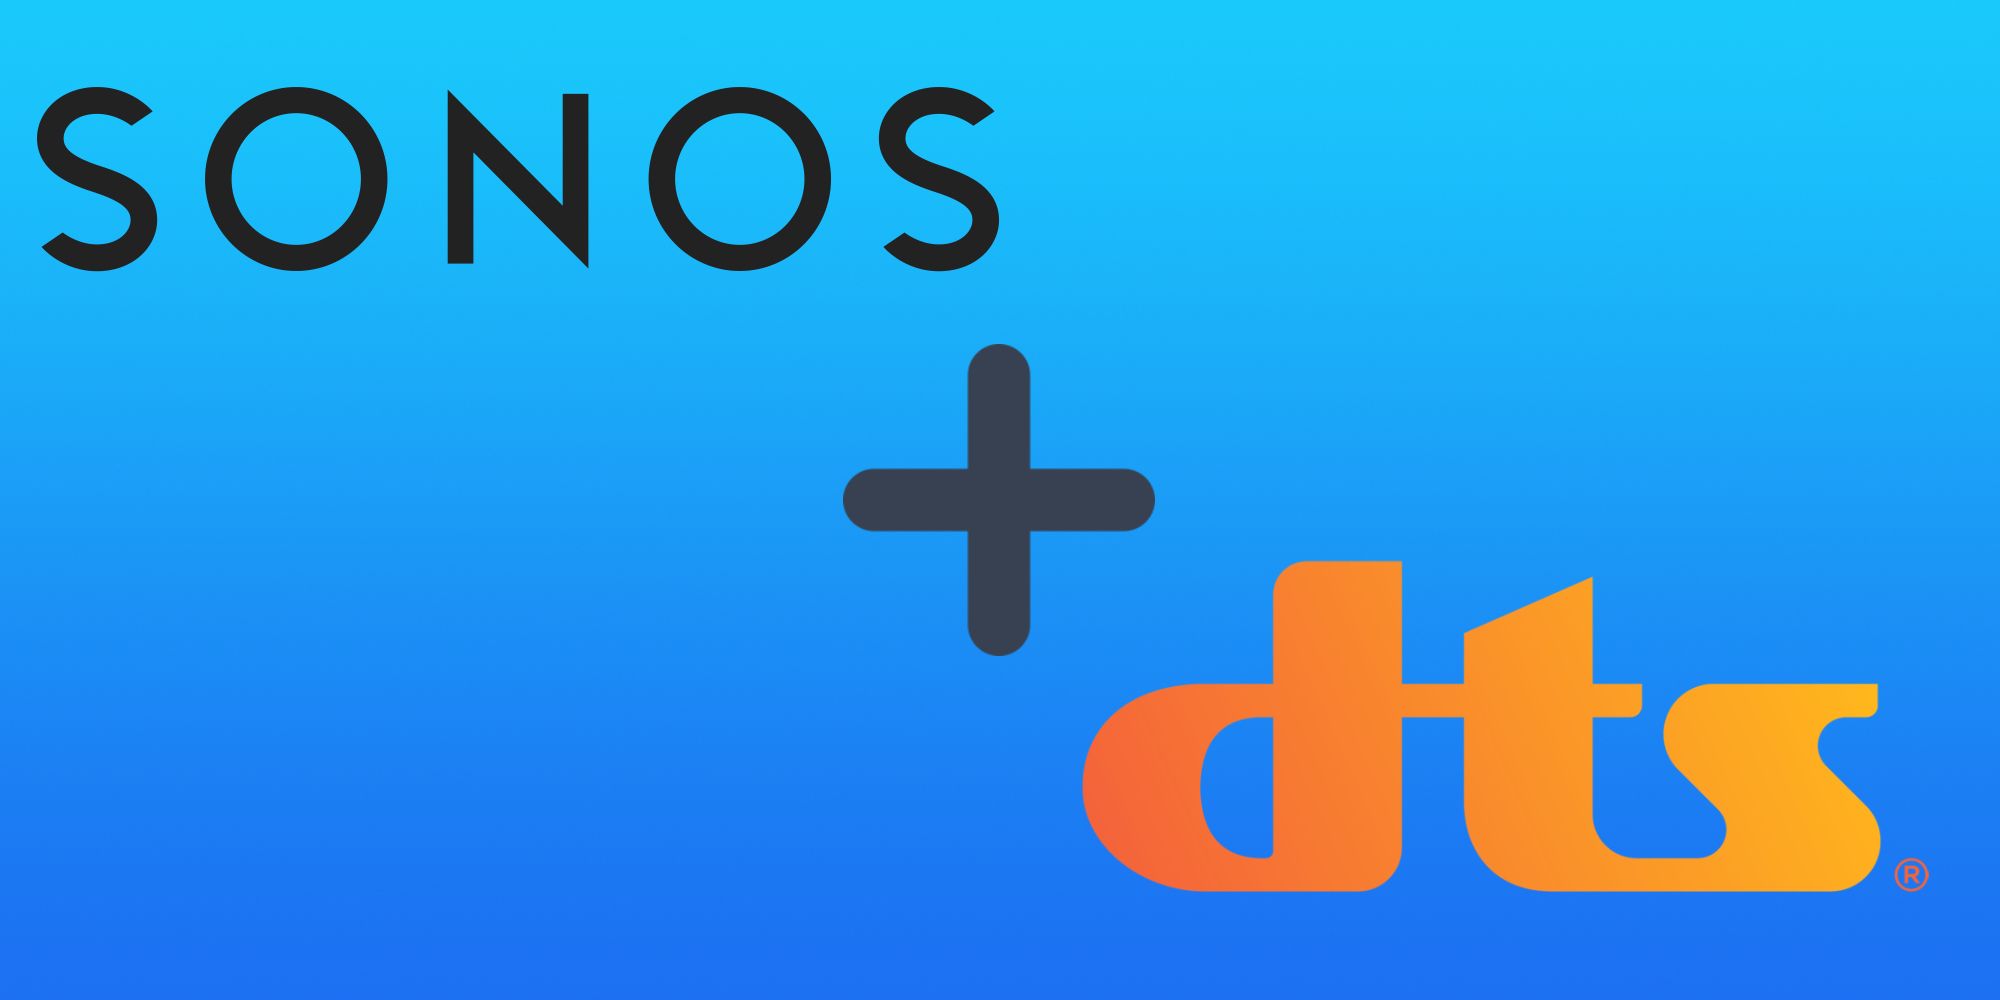 Sonos and DTS logos